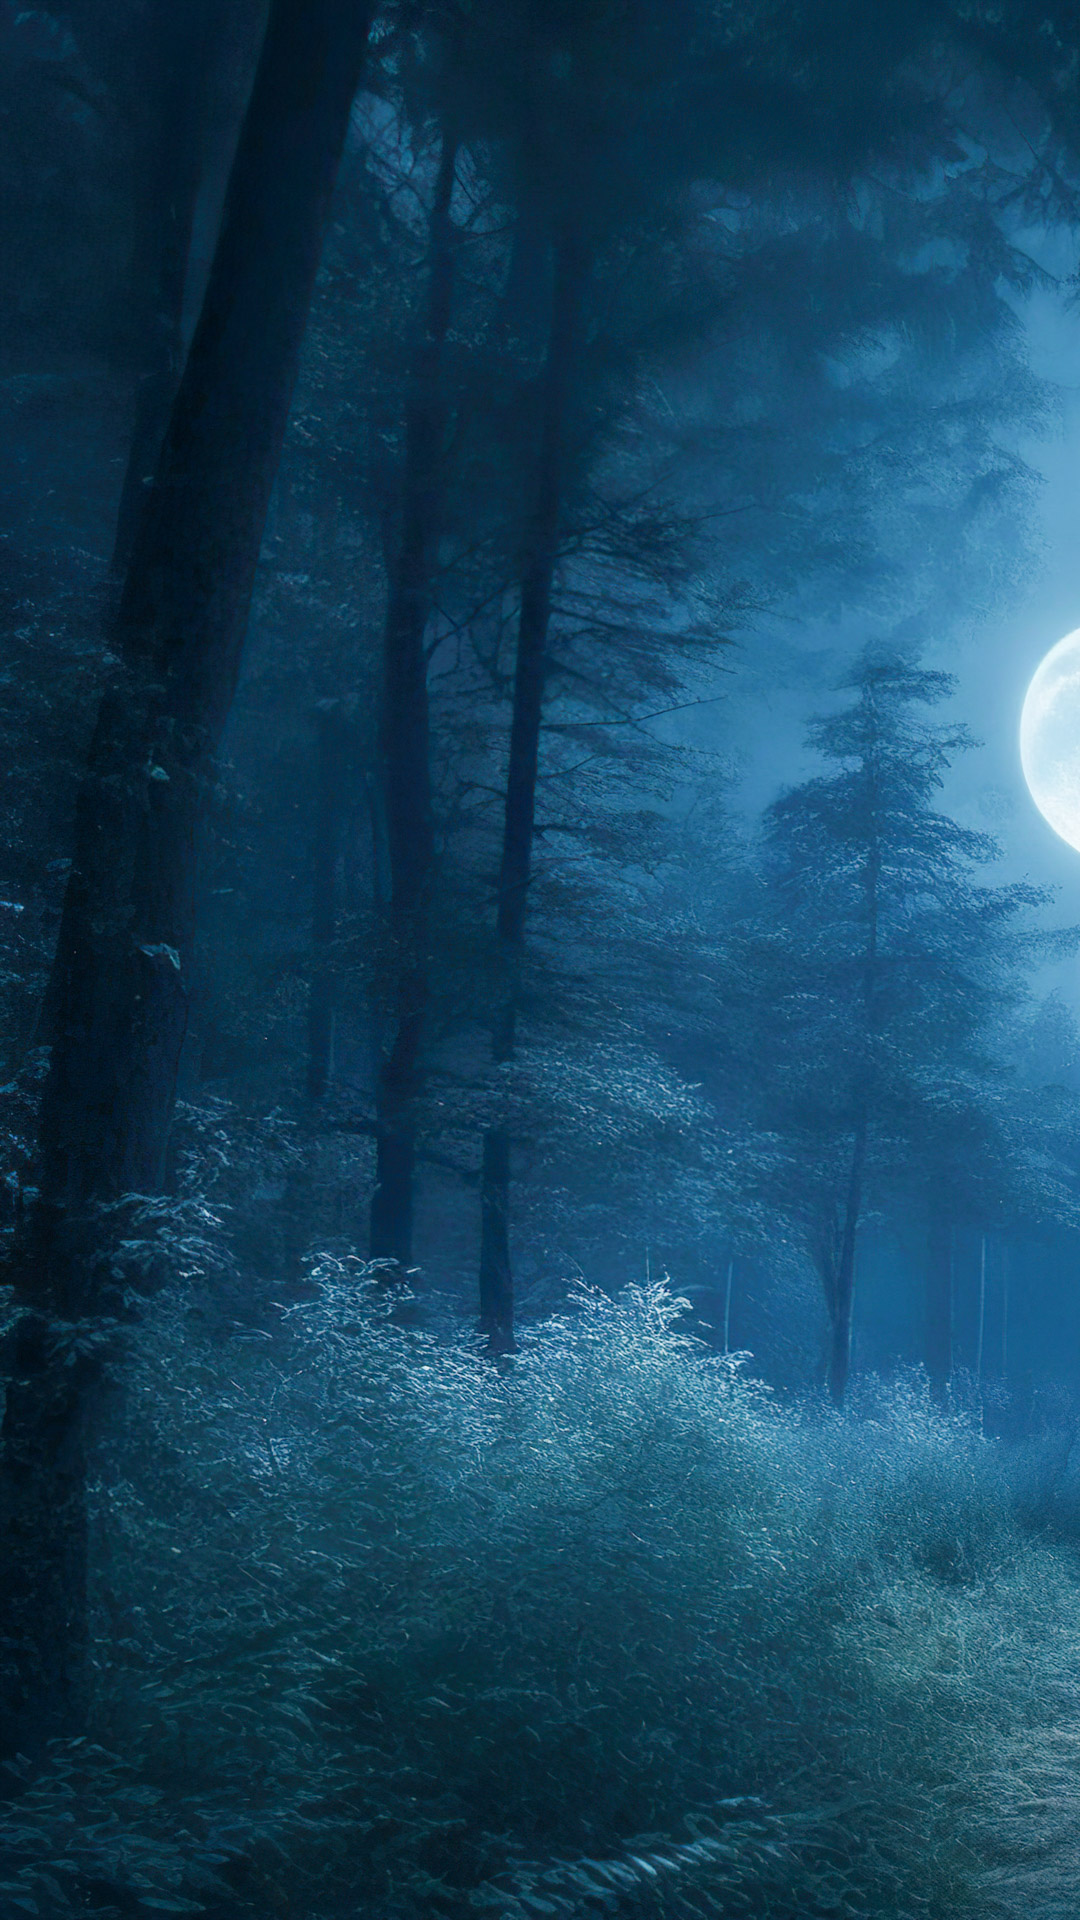 Adorn your mobile with our HD scenery wallpapers in 1080p, showcasing a forest illuminated by the blue moon glow on a cold winter evening.